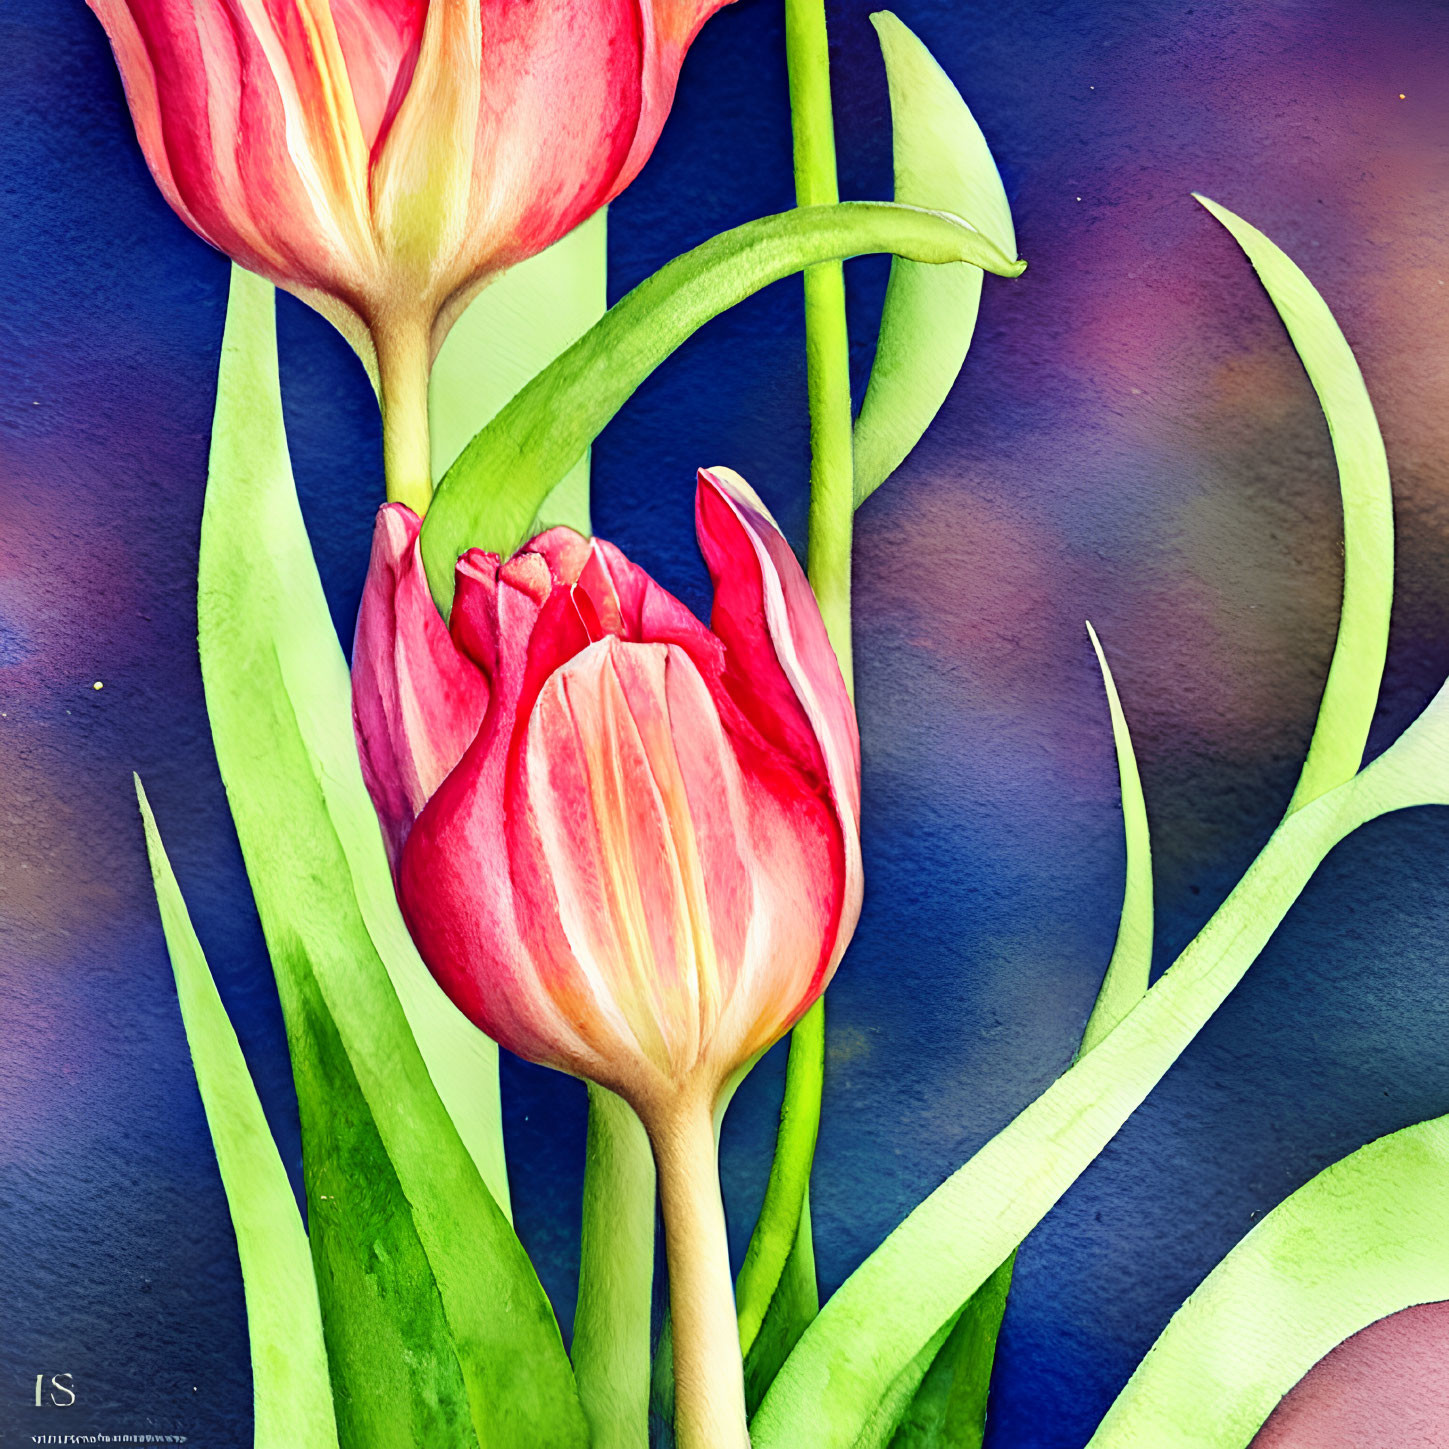 Pink tulips on blue textured background with green leaves